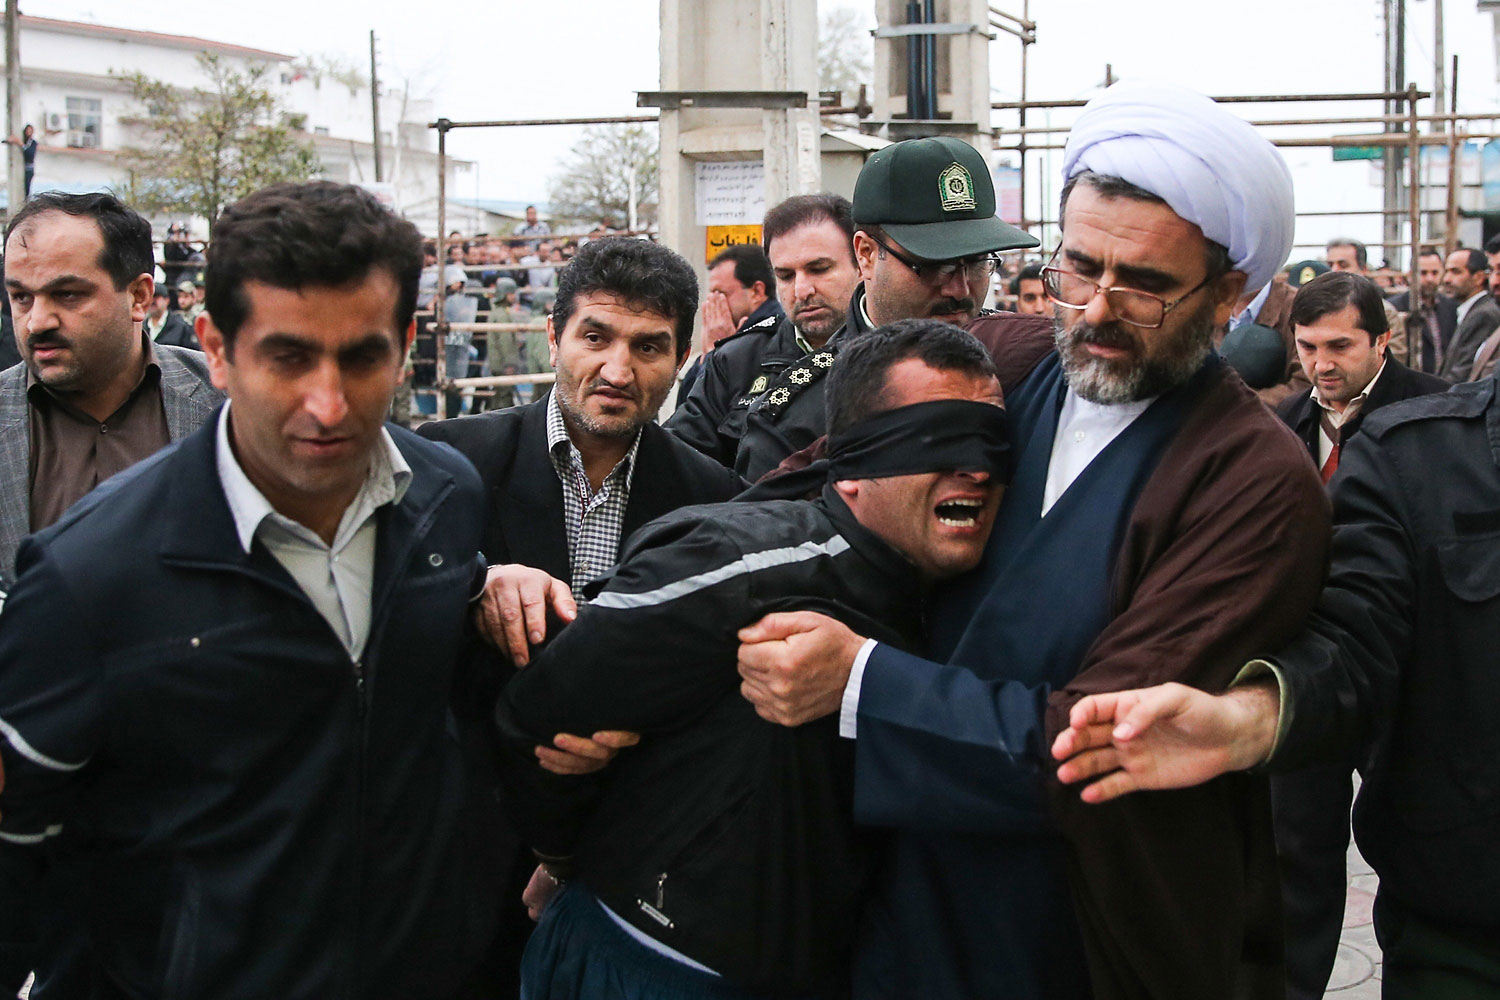 Balal is brought to the gallows during his execution ceremony in the northern city of Nowshahr on April 15, 2014.